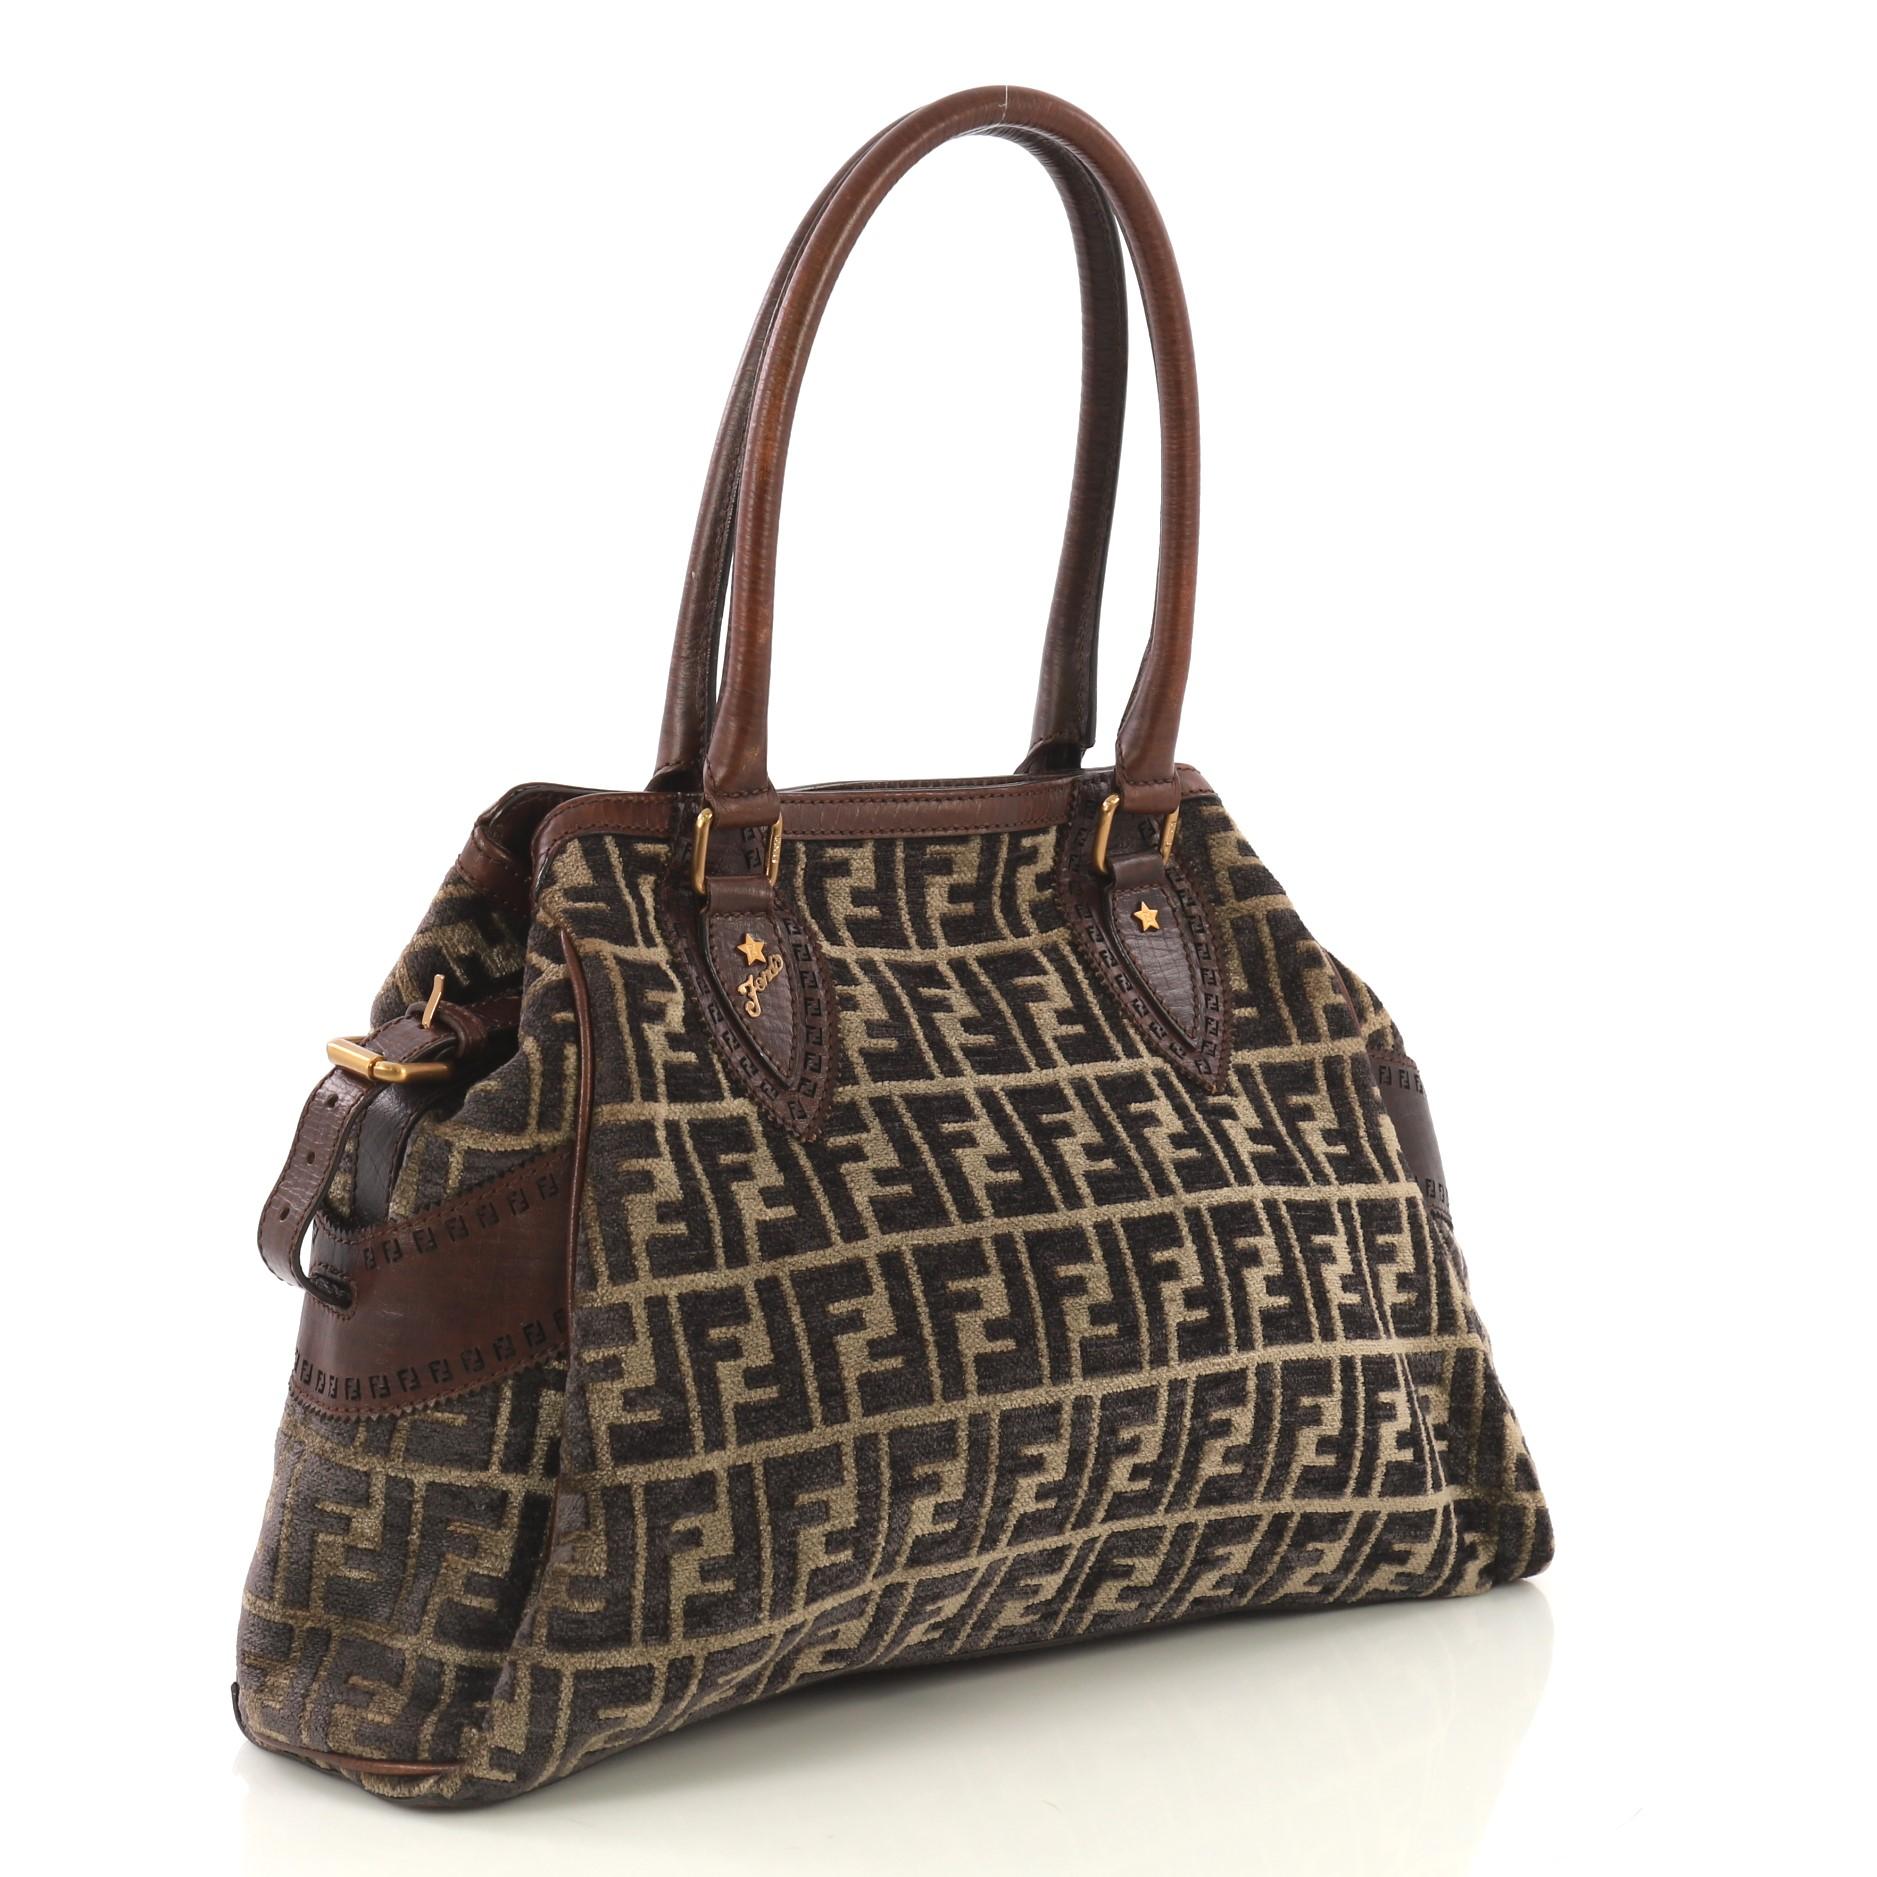 This Fendi Bag Du Jour Zucca Velvet Medium, crafted in brown zucca velvet, features dual-rolled leather handles, exterior side pockets, and gold-tone hardware. Its press stud closures opens to a brown zucca velvet interior with zip pocket.